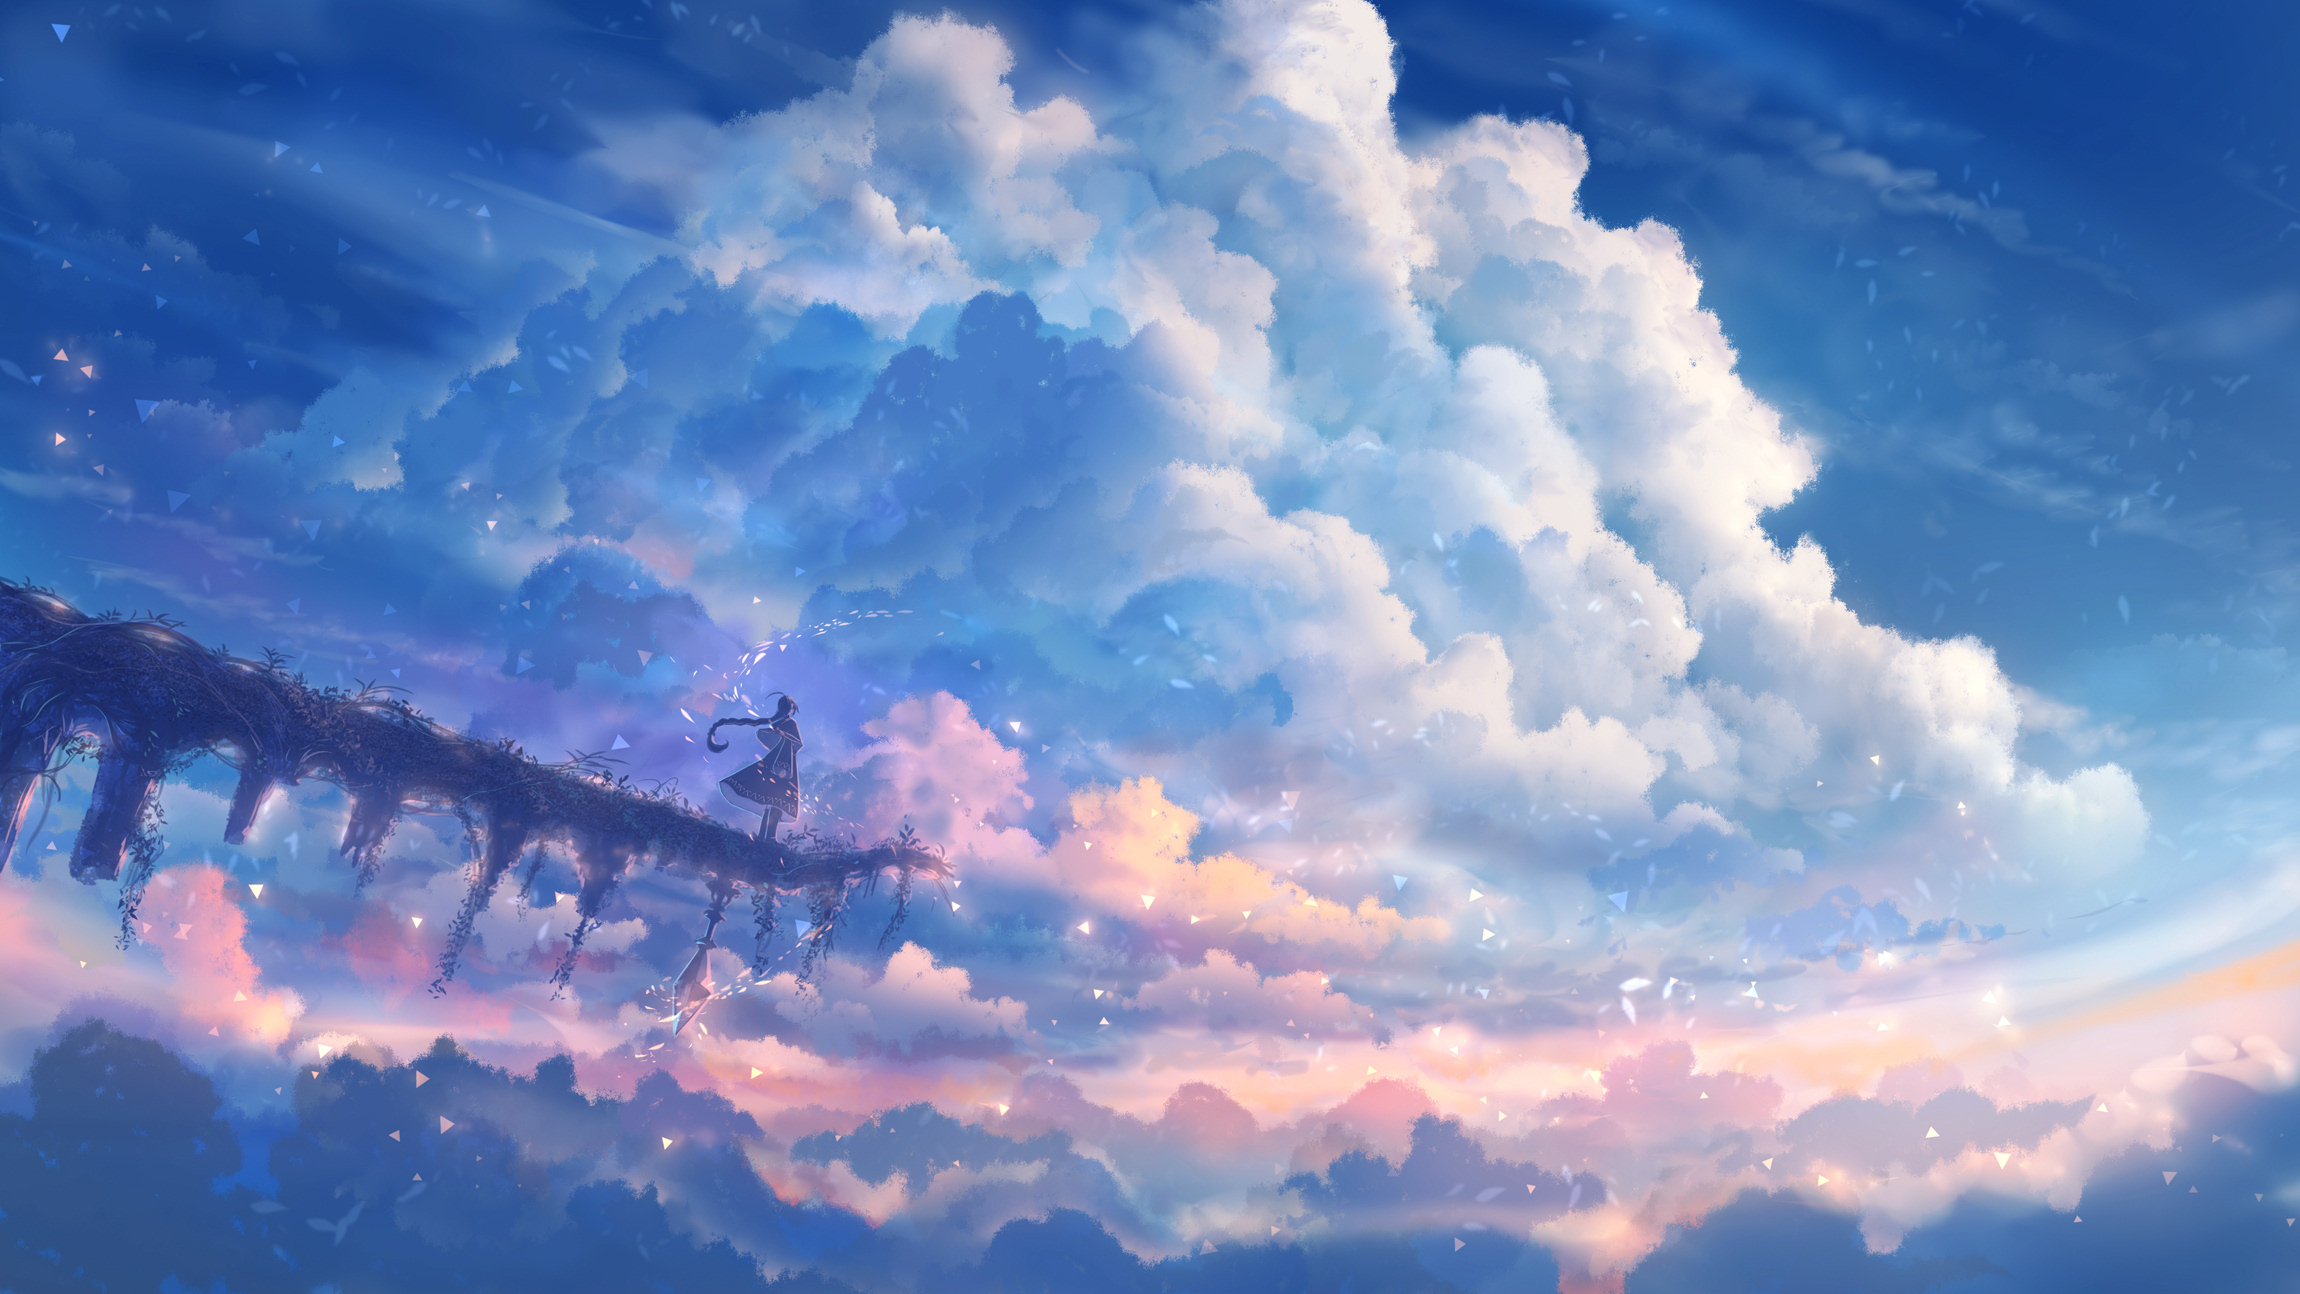 Anime 2300x1294 sky clouds Bou Nin floating particles dress braids women outdoors ponytail polychromatic